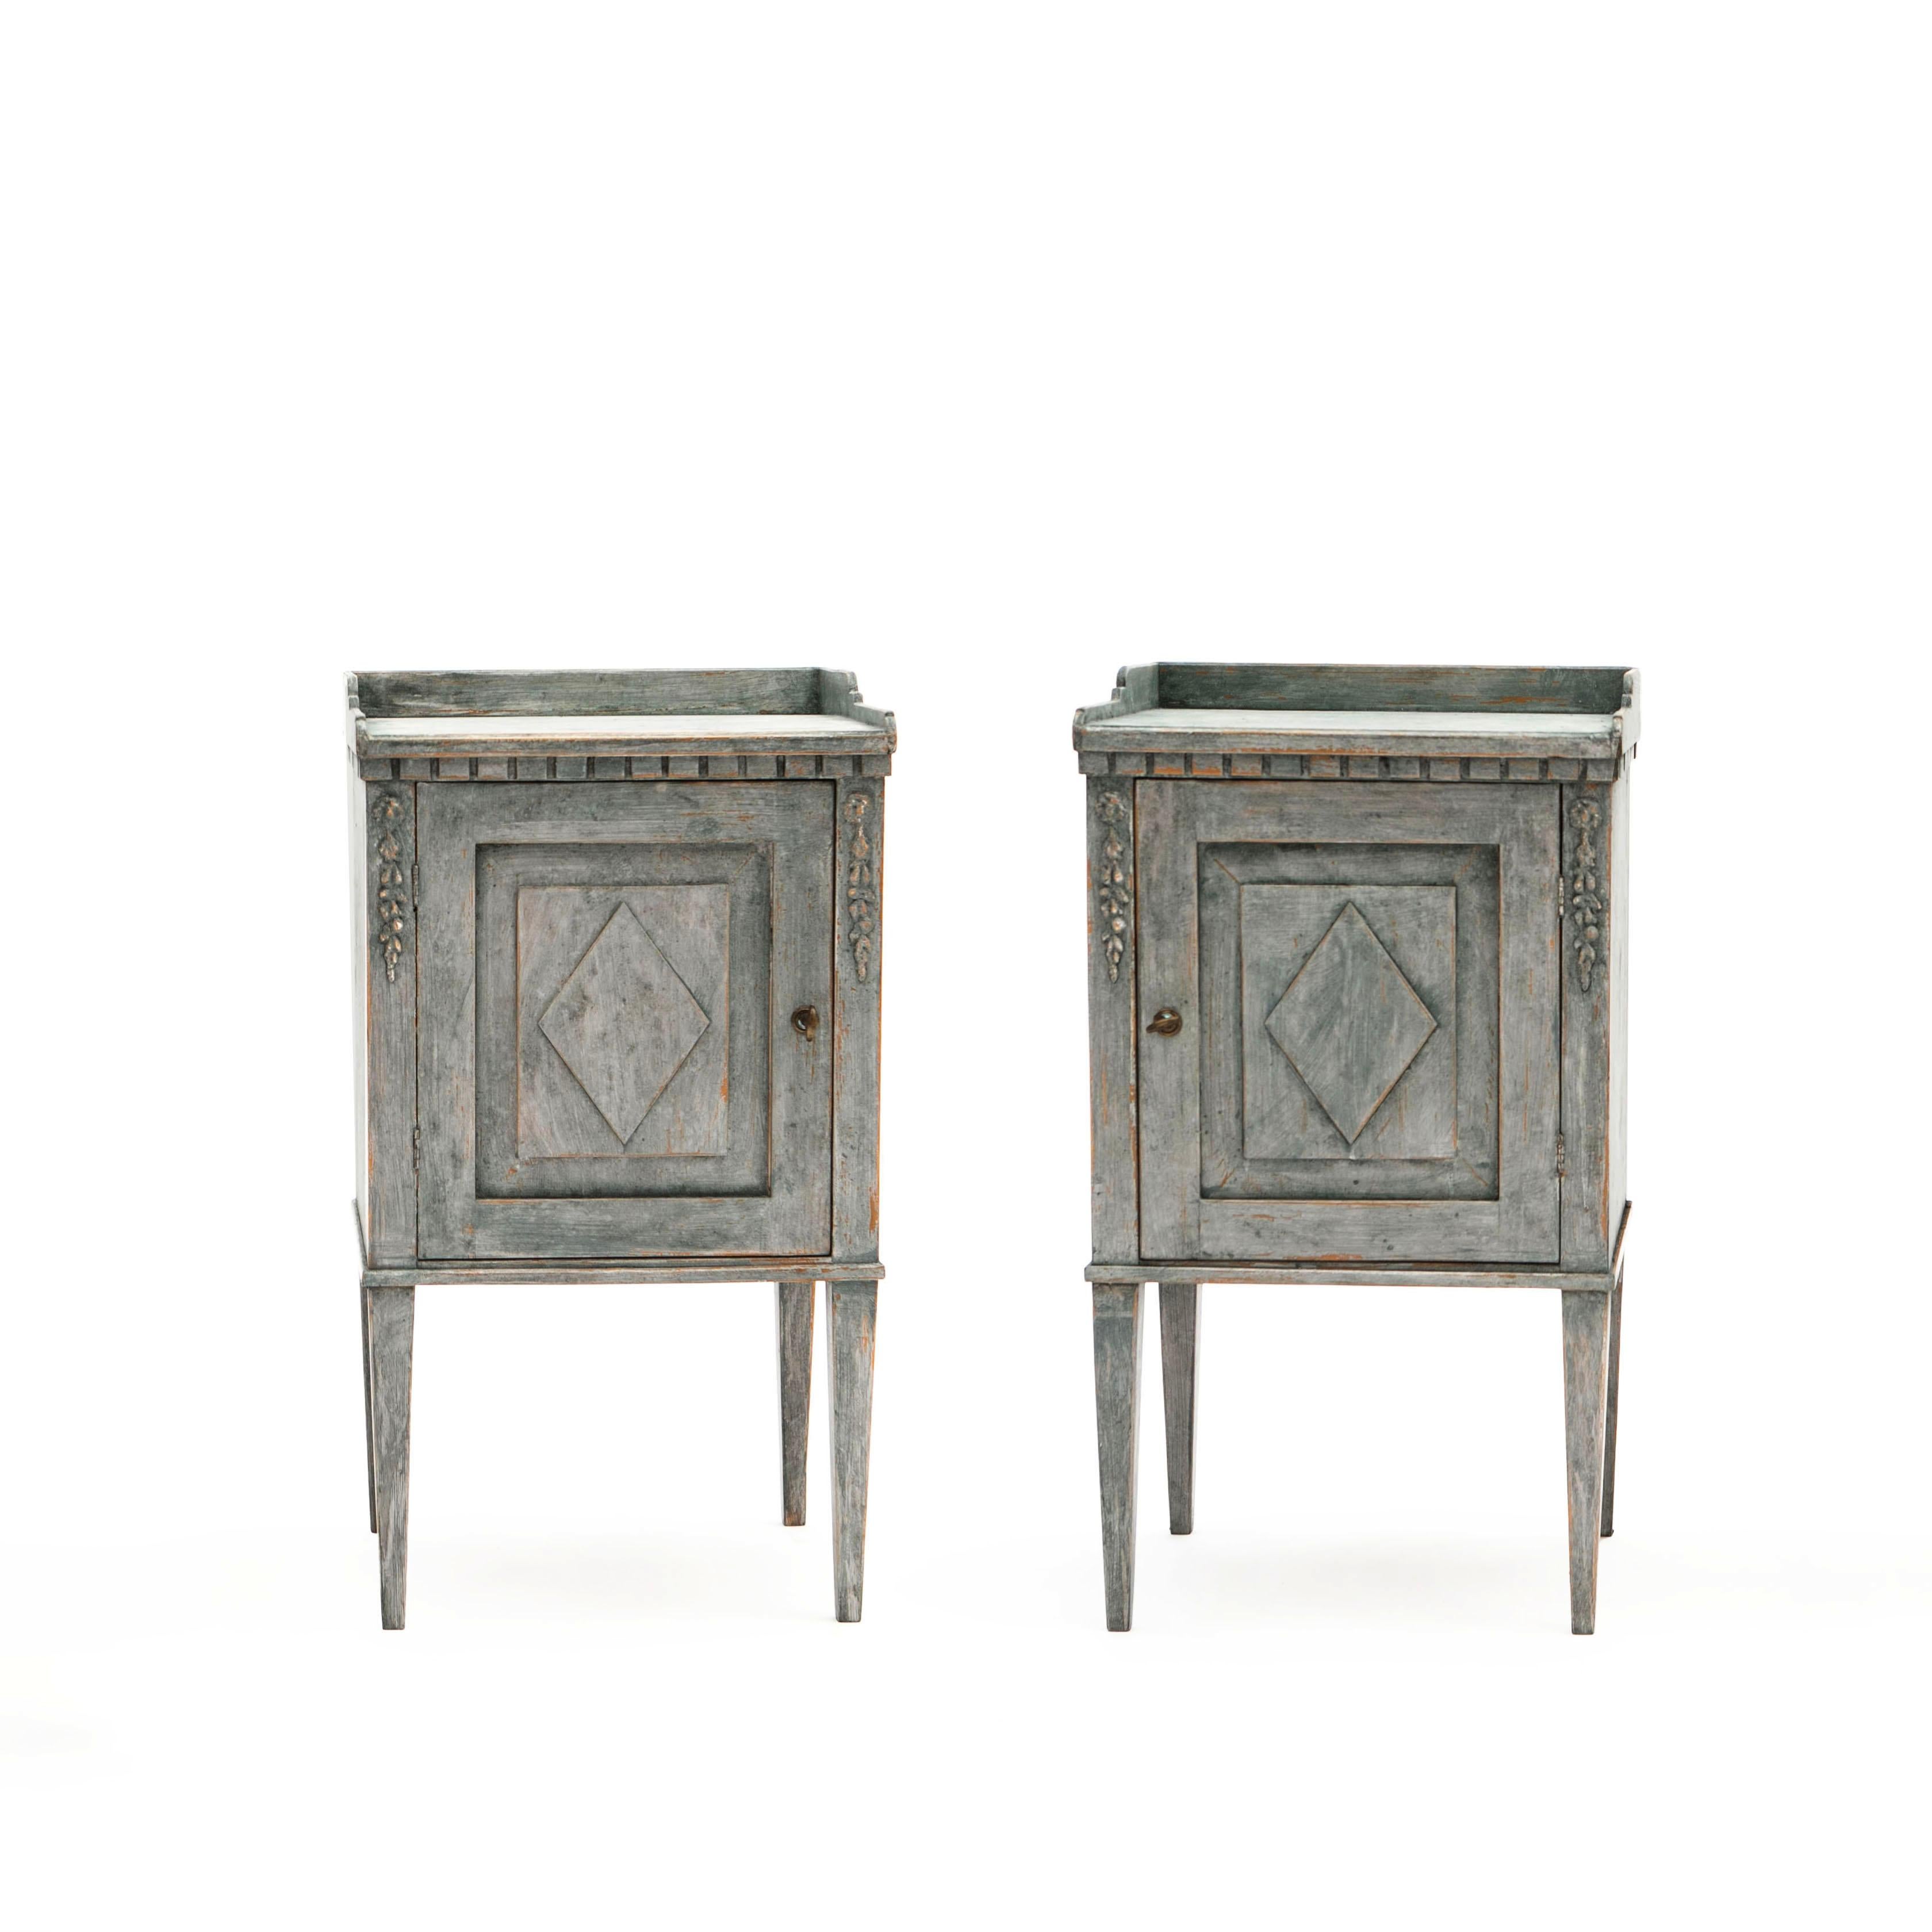 A pair of Swedish Gustavian style painted wood side cabinets / bedside cabinets from the mid 19th century.
These soft blue green painted cabinets feature a rectangular top with three-quarter gallery, sitting above a carved dentil molding. The façade